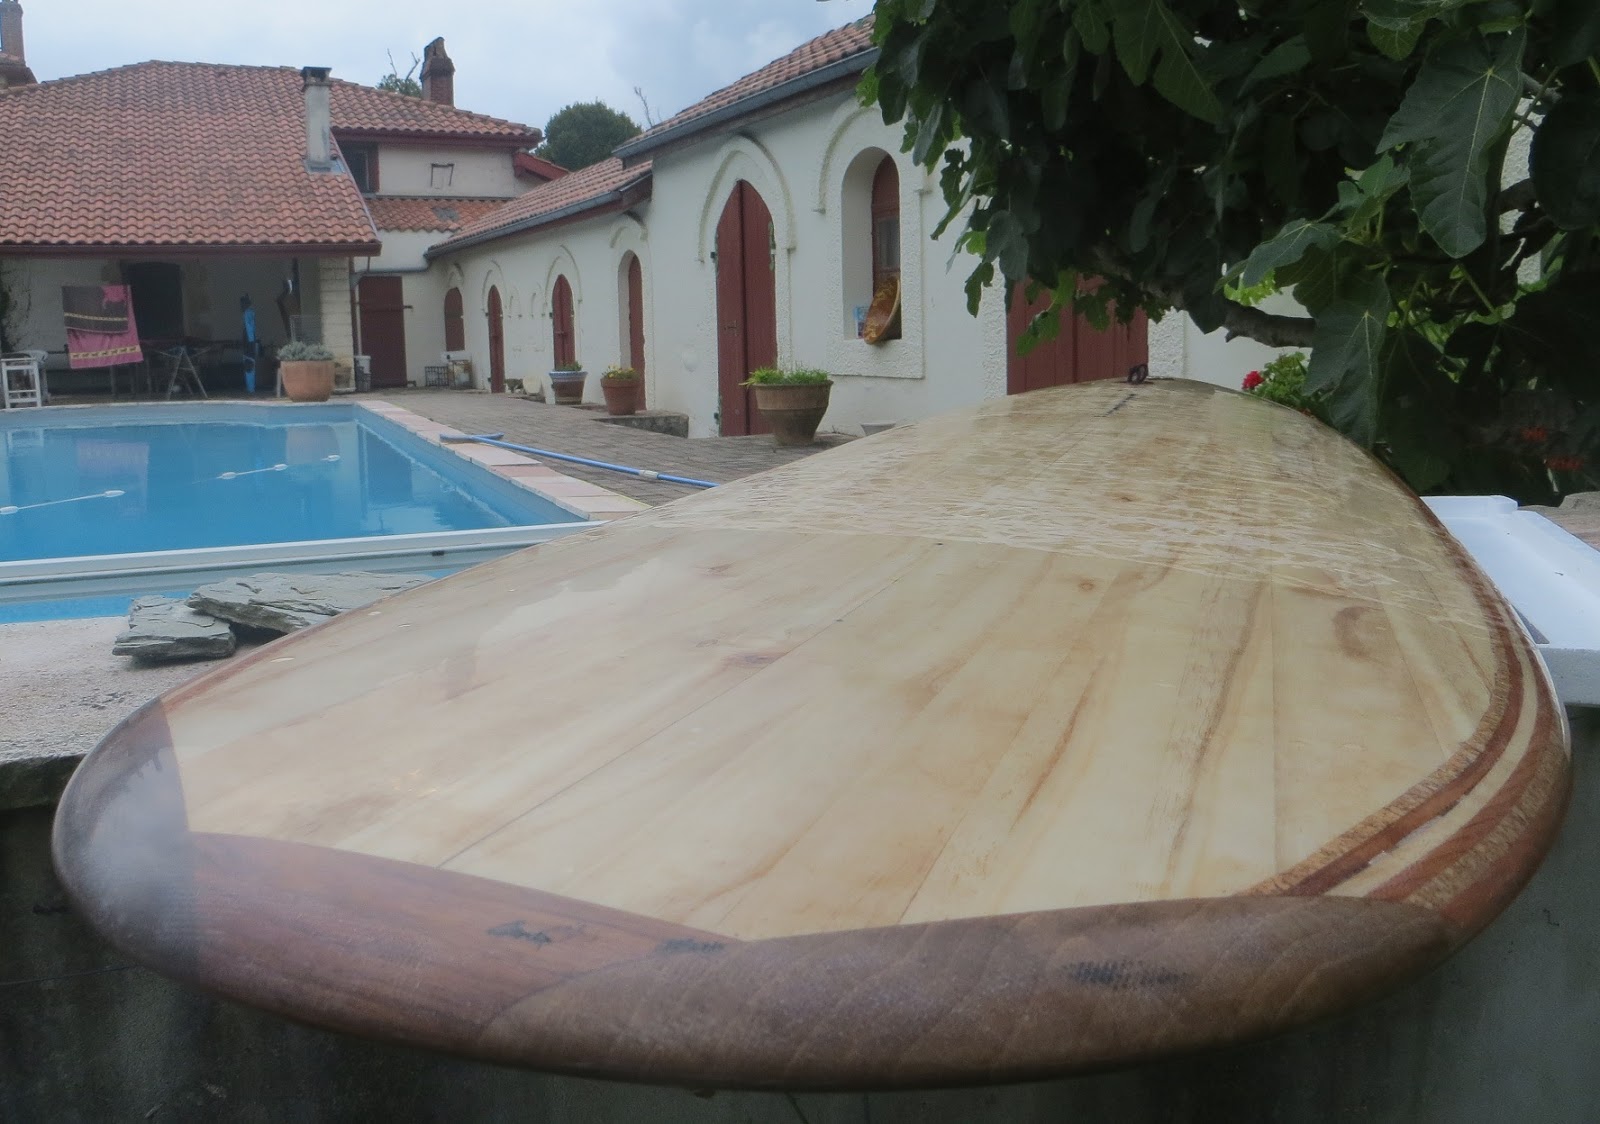 Wooden Surfboards: JB from France experiments with wooden boards